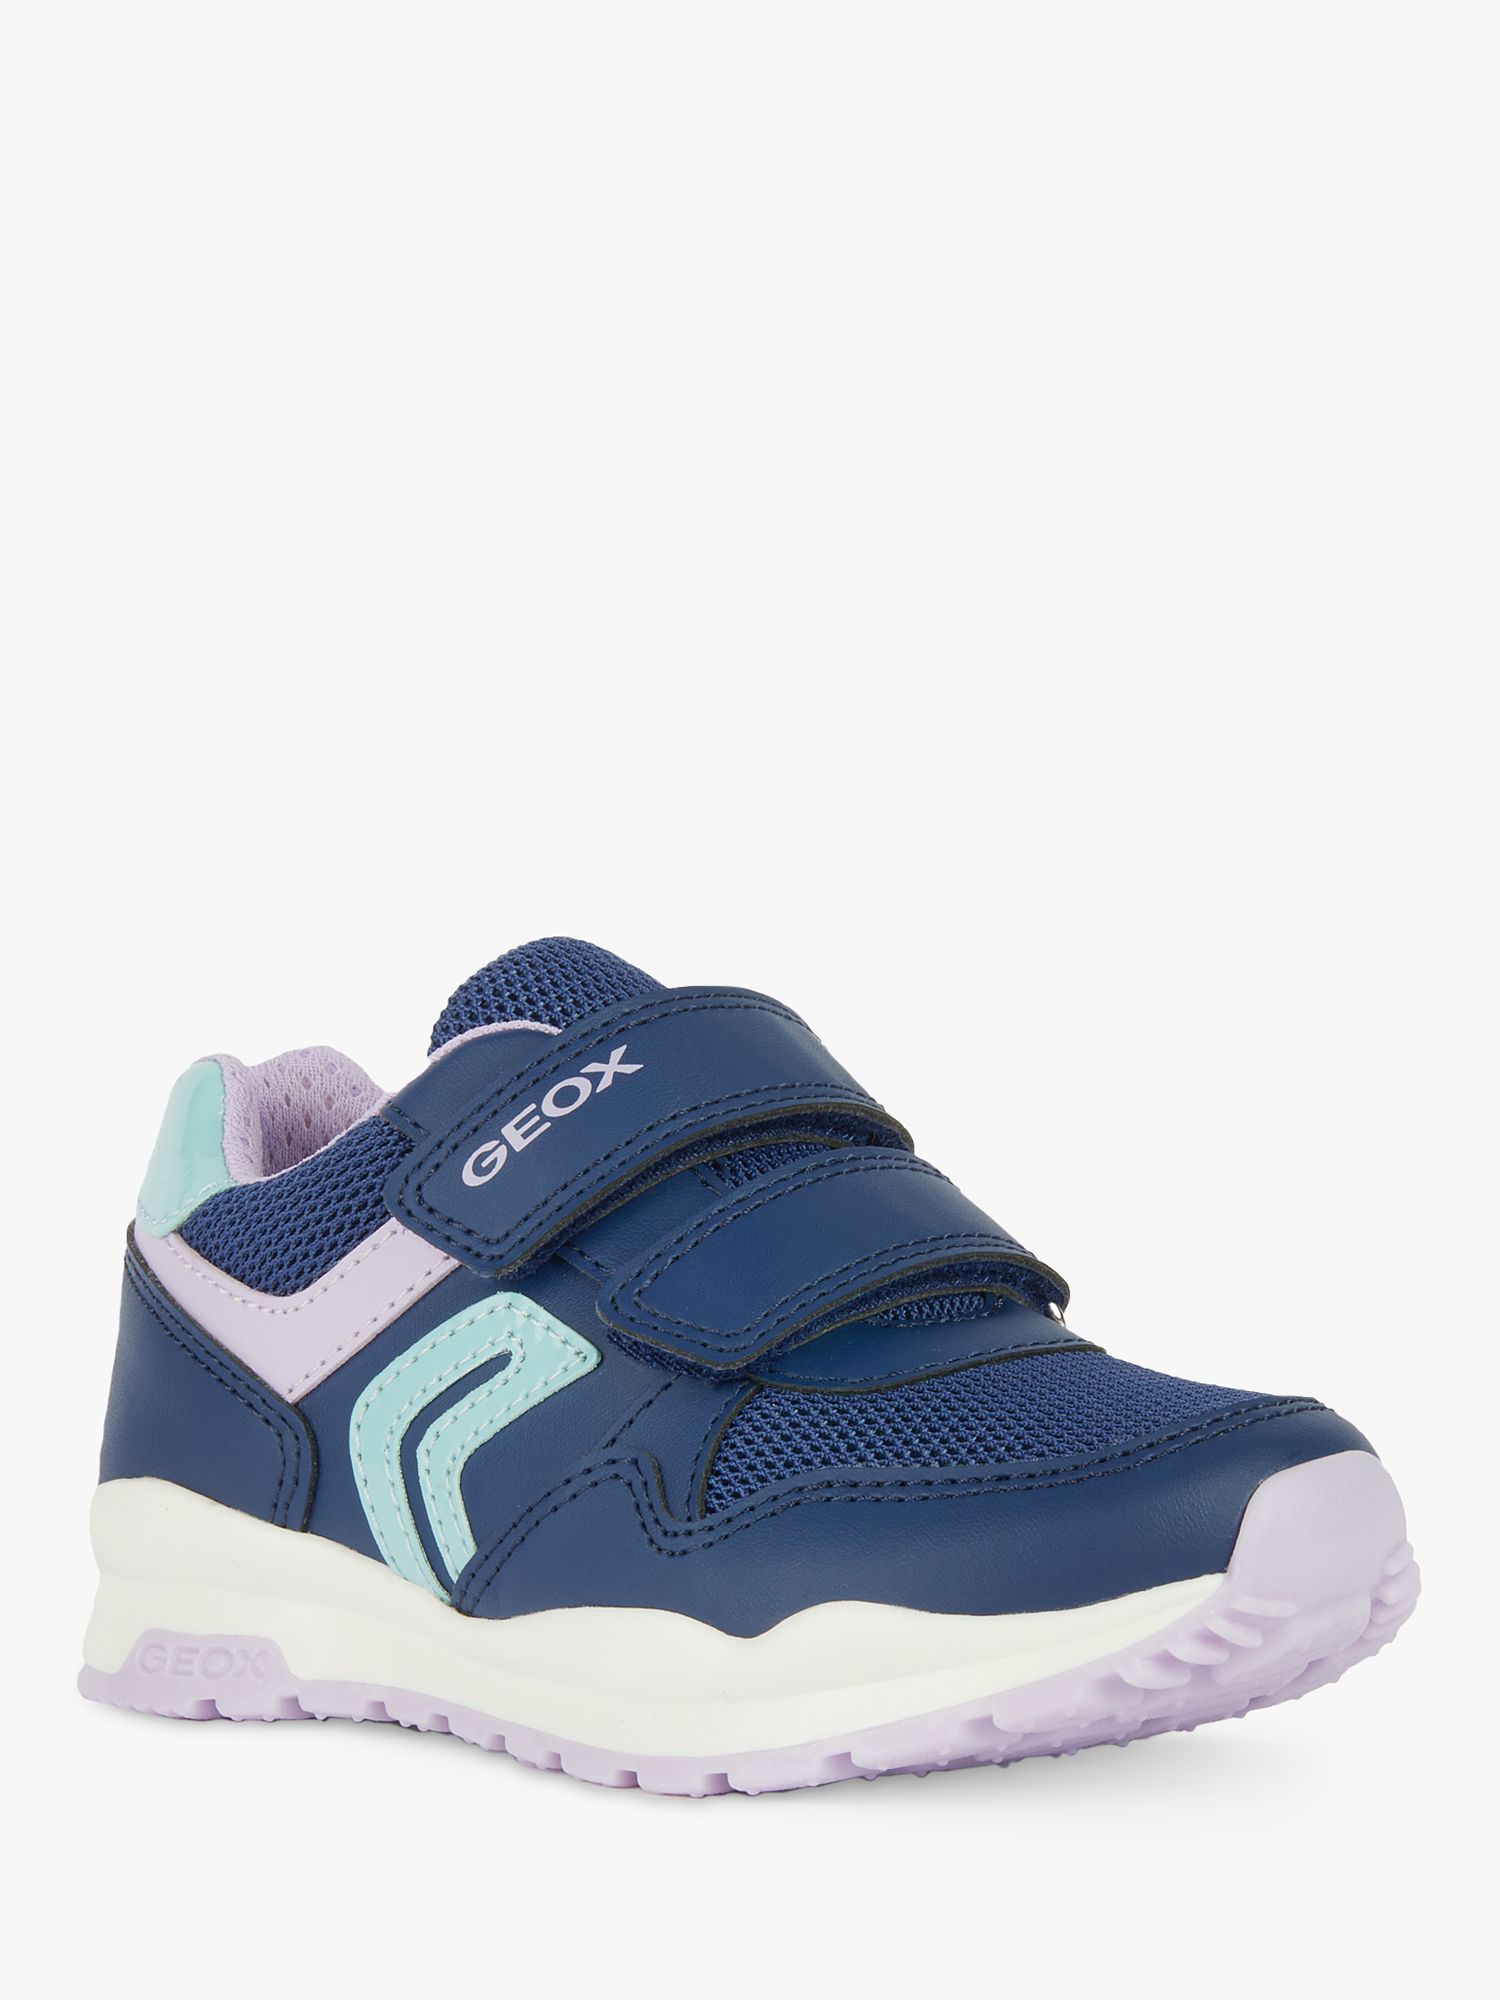 Buy Geox Kids' Pavel Low-Cut Trainers Online at johnlewis.com